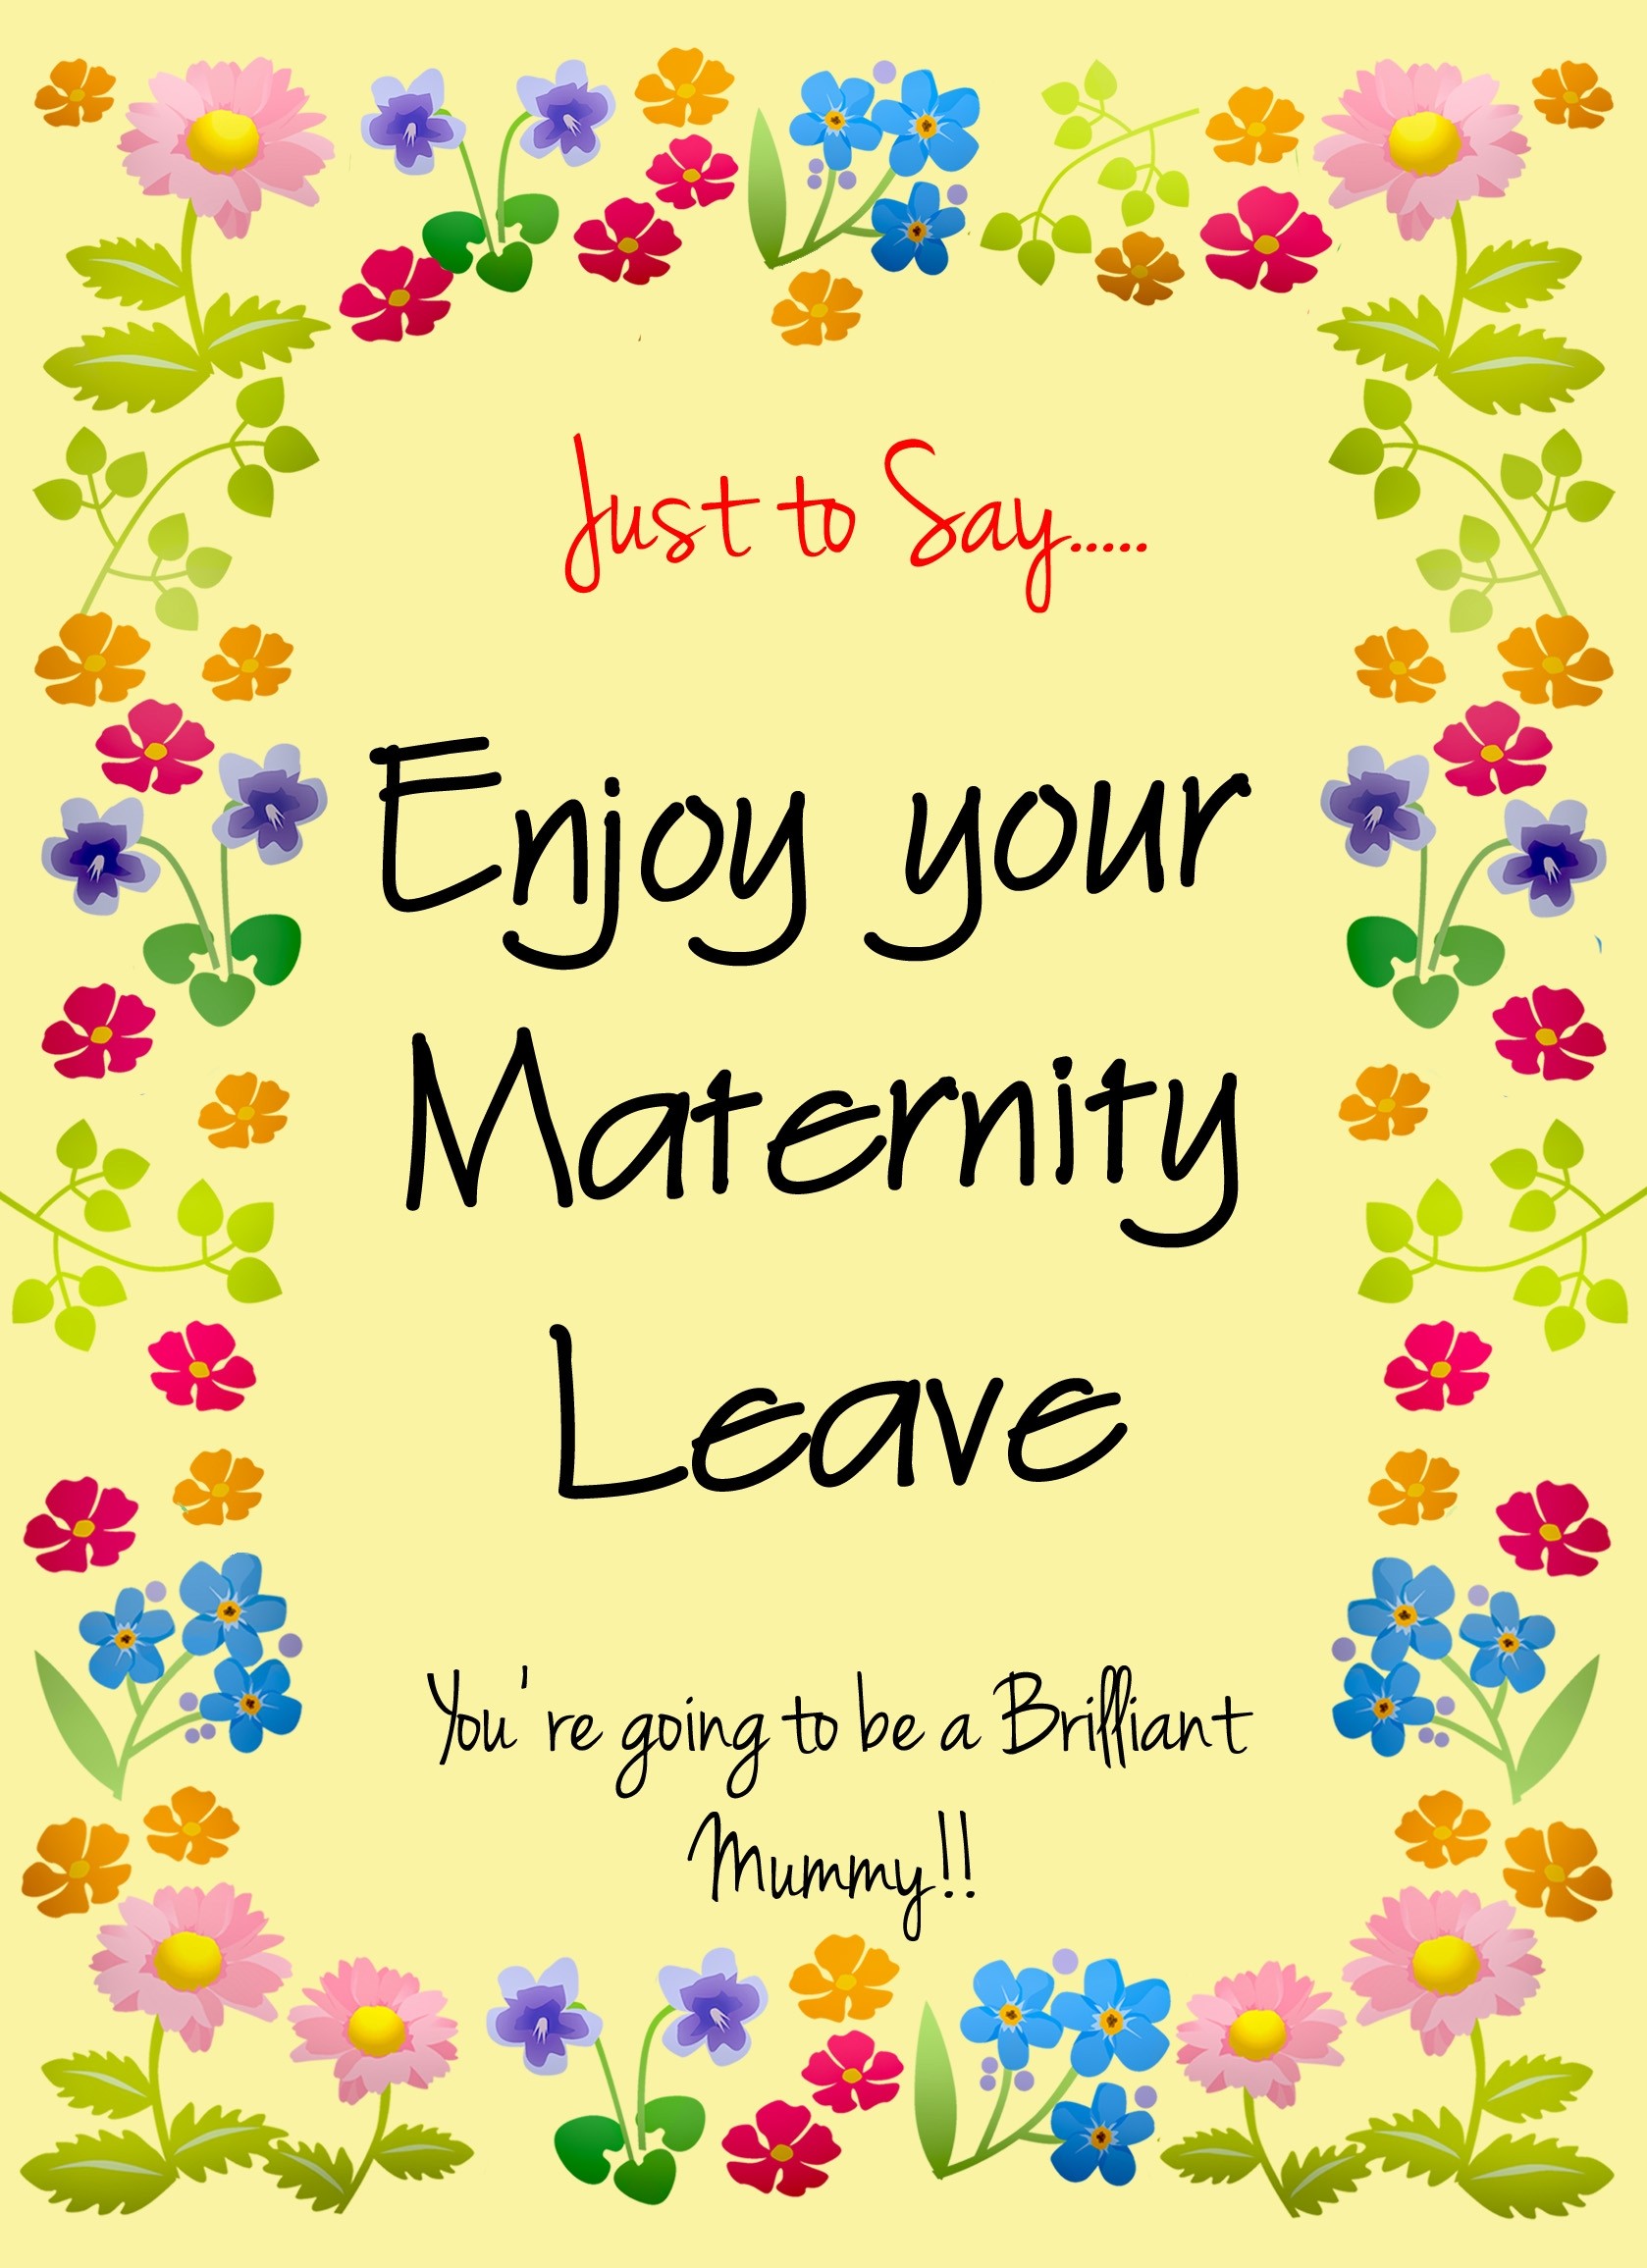 Maternity Leave Baby Pregnancy Expecting Card (Mummy)